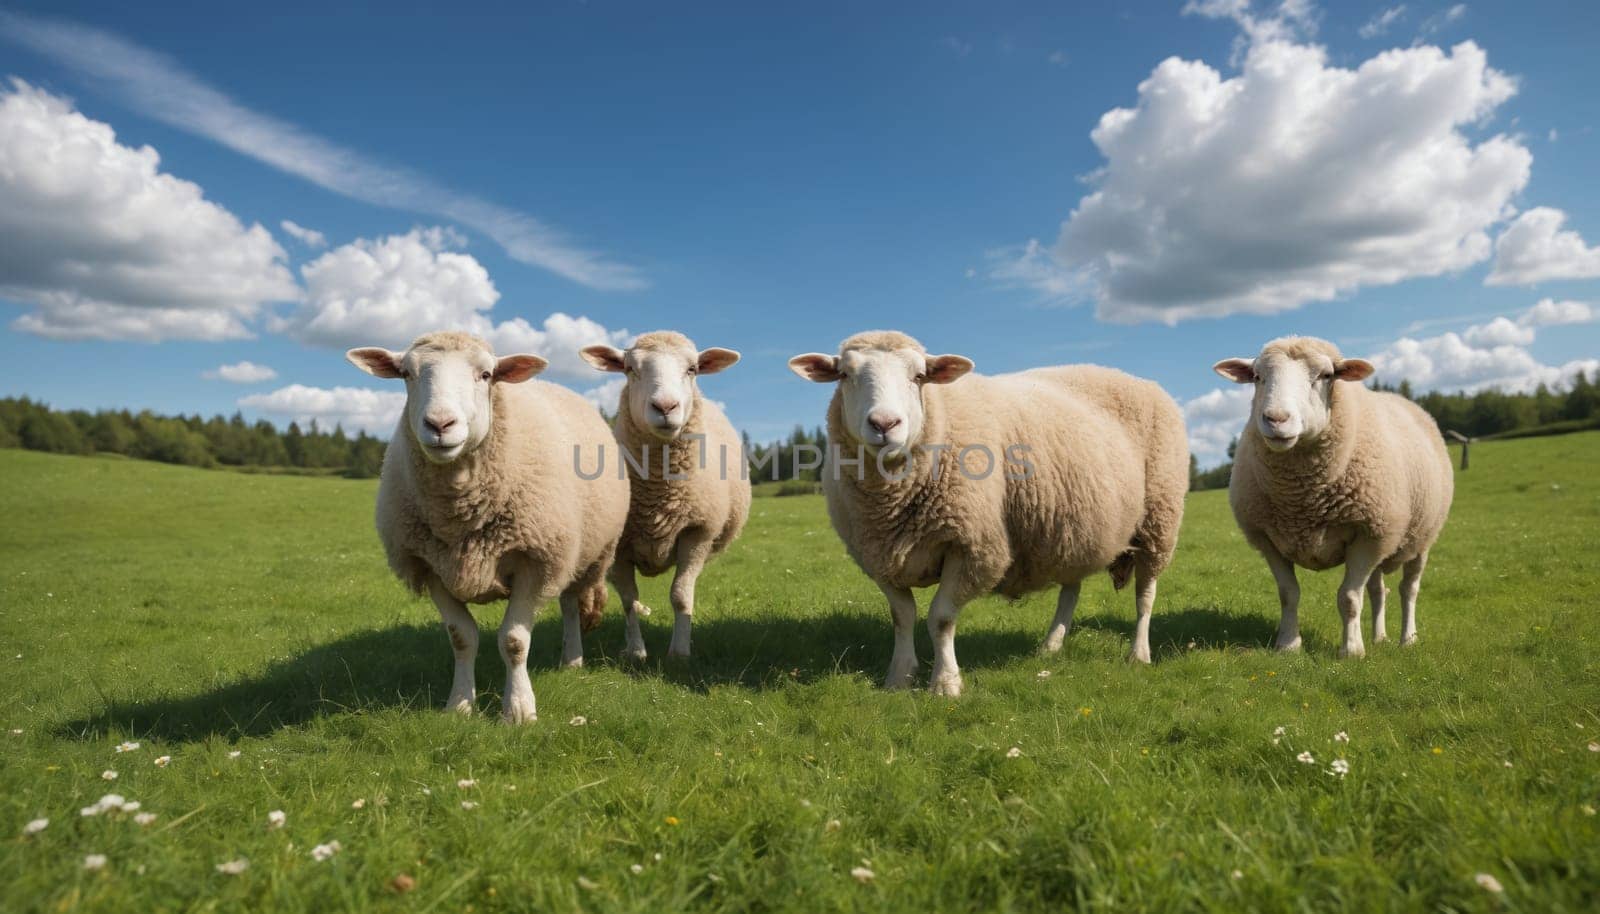 A flock of sheep graze peacefully in a lush green pasture under a bright blue sky dotted with puffy white clouds and a large, dramatic grey cloud. The sheep are all white and fluffy, with some facing the camera while others look away. The grass is a vibrant green and there are a few small flowers scattered throughout the field.